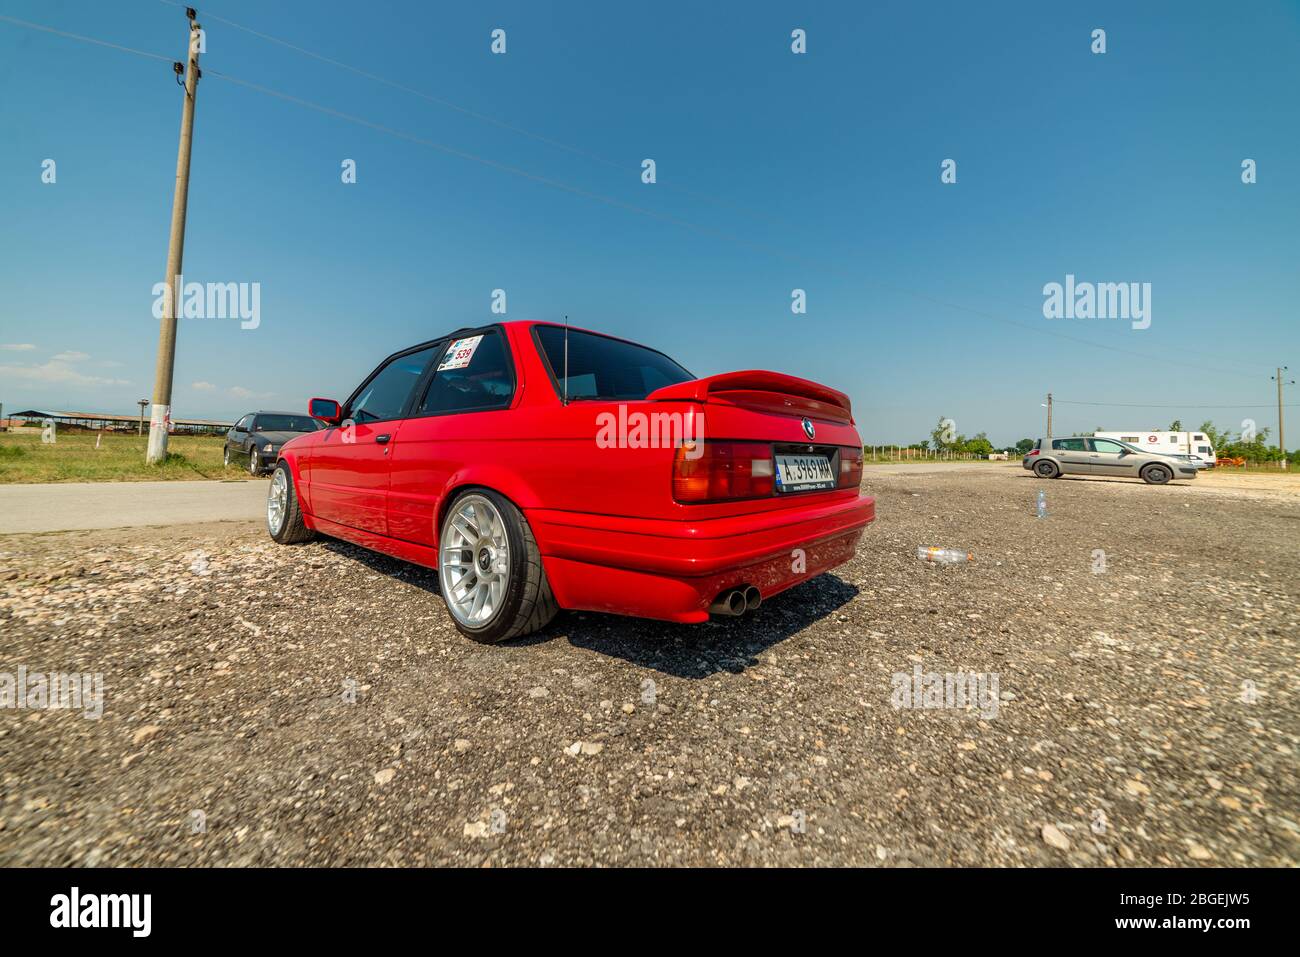 Page 3 0 Bmw High Resolution Stock Photography And Images Alamy